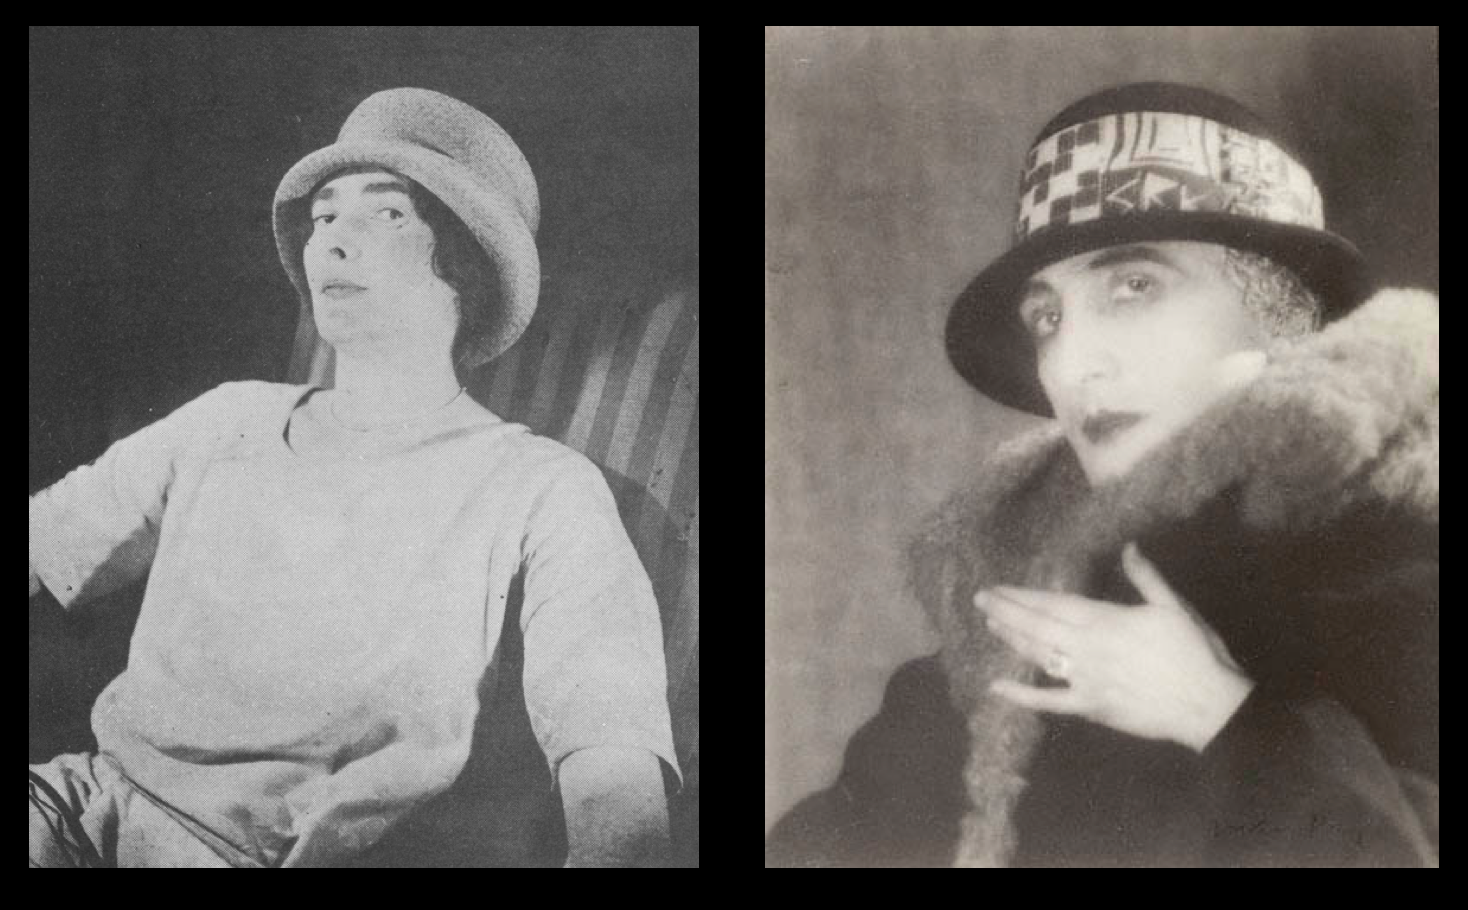 Black and white photos of Mina Loy and Man Ray, both wearing small-brimmed hats, 3/4 view, prominent eyebrows, and unsmiling closed lips.